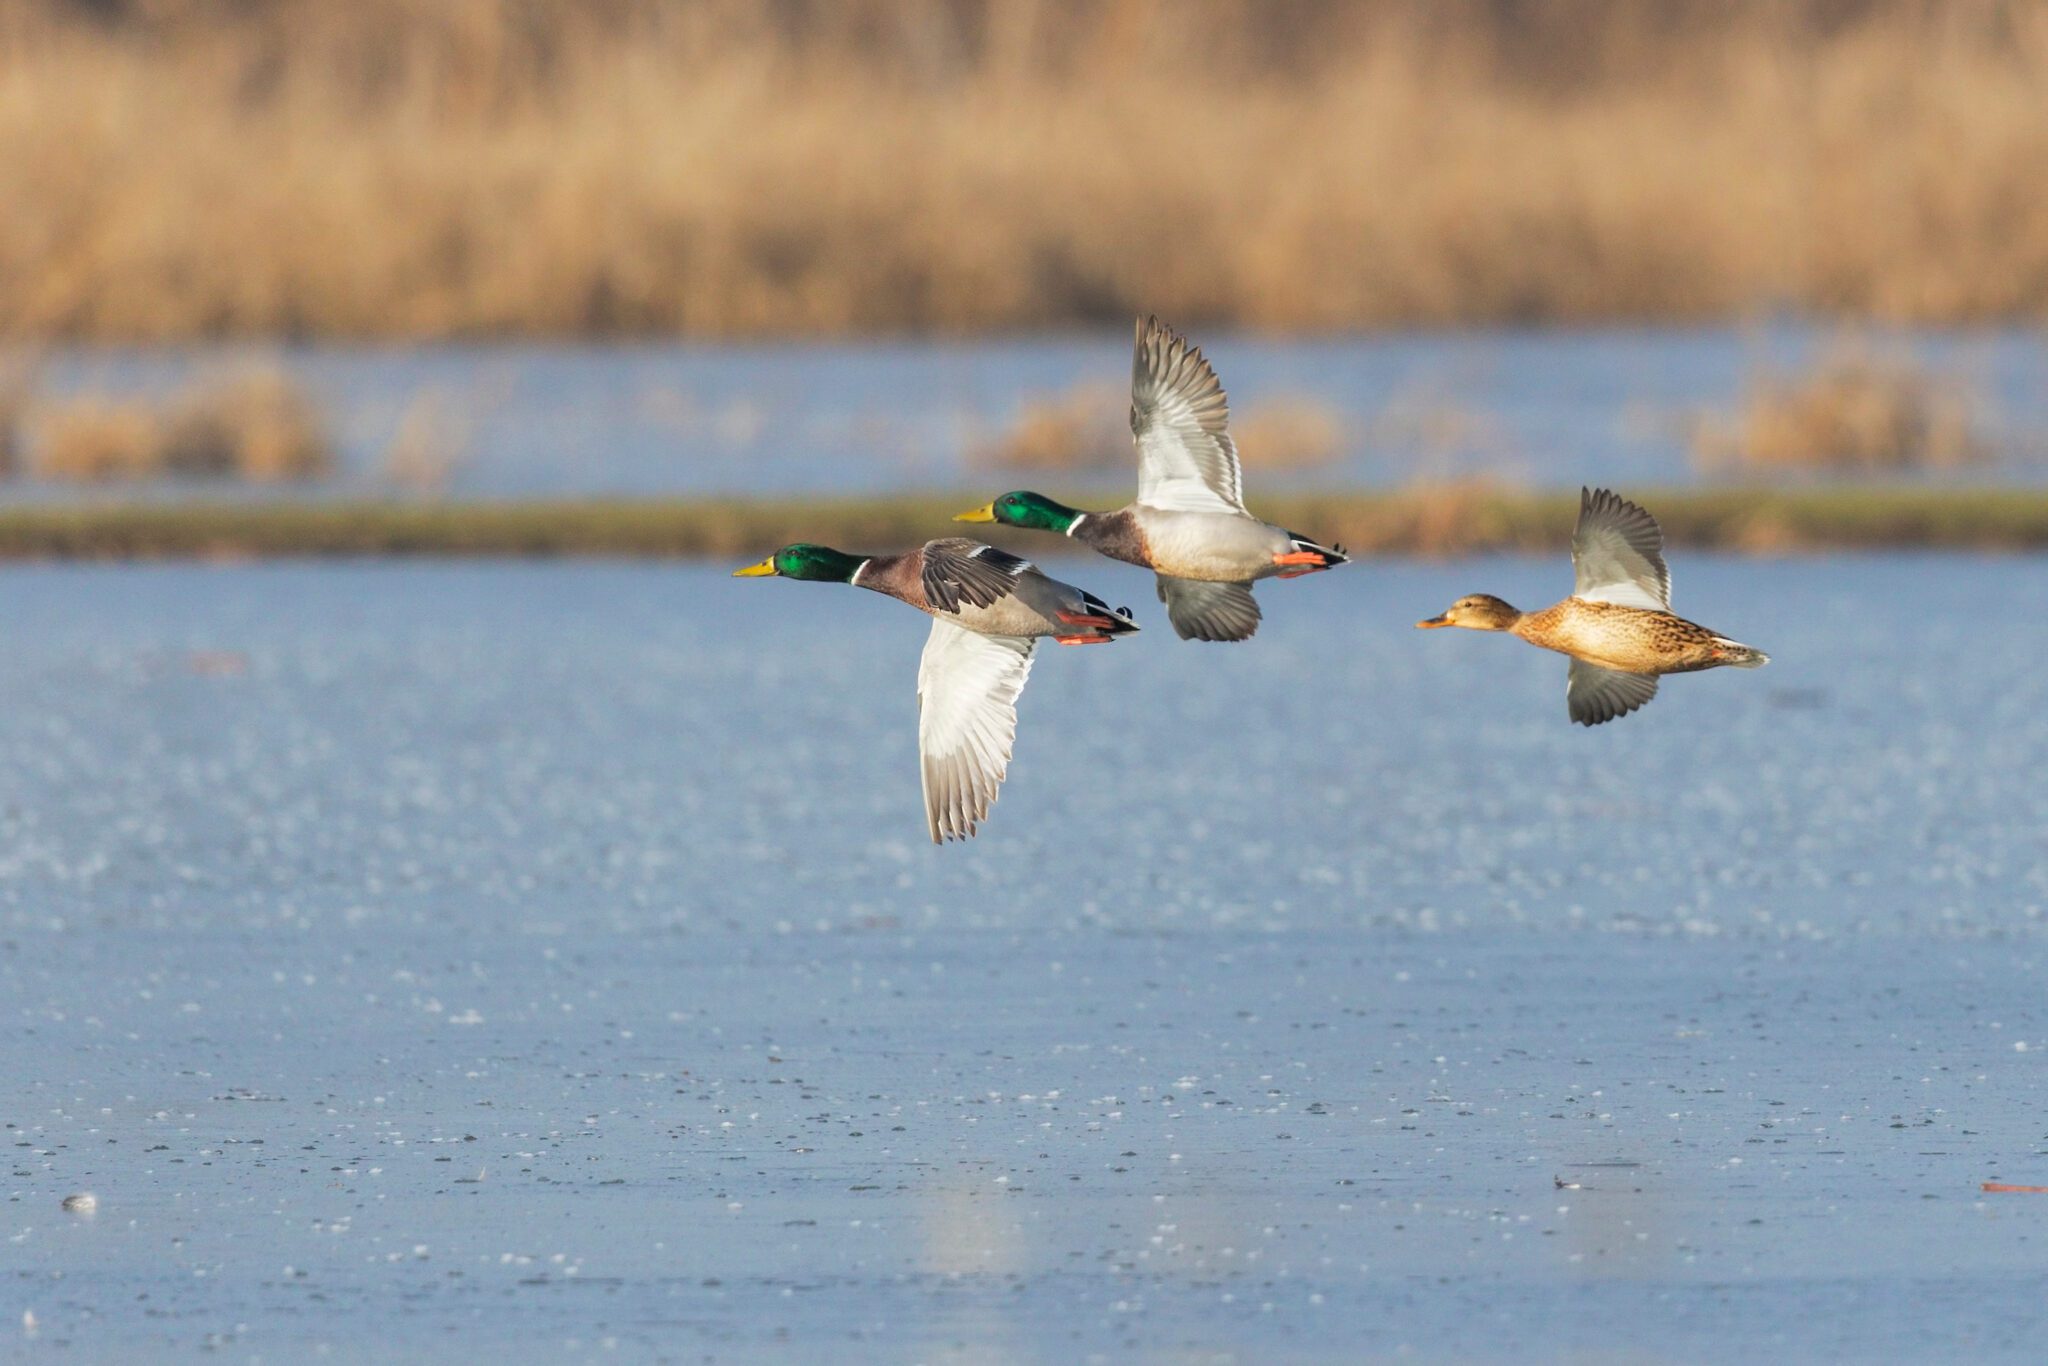 Waterfowl flying over body of water during the day